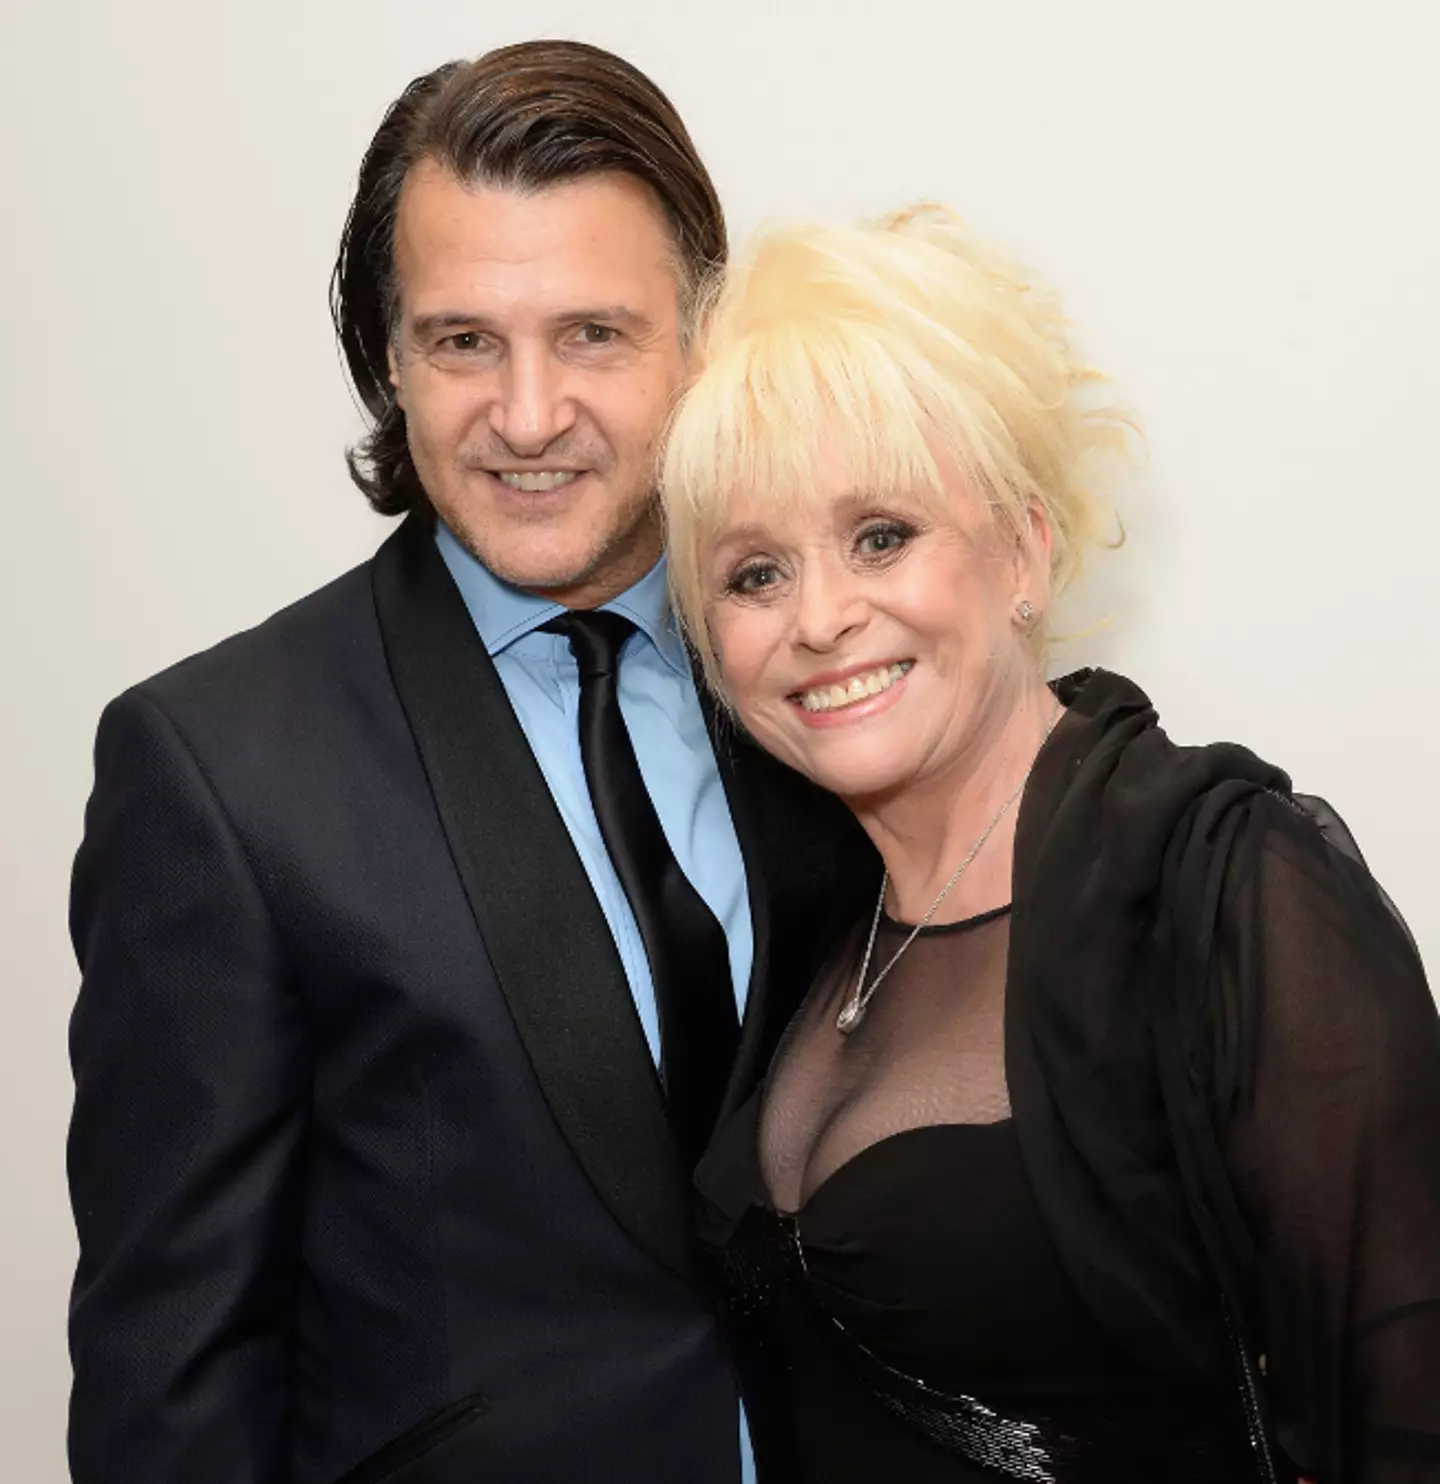 Scott Mitchell was 26 years younger than Barbara Windsor.